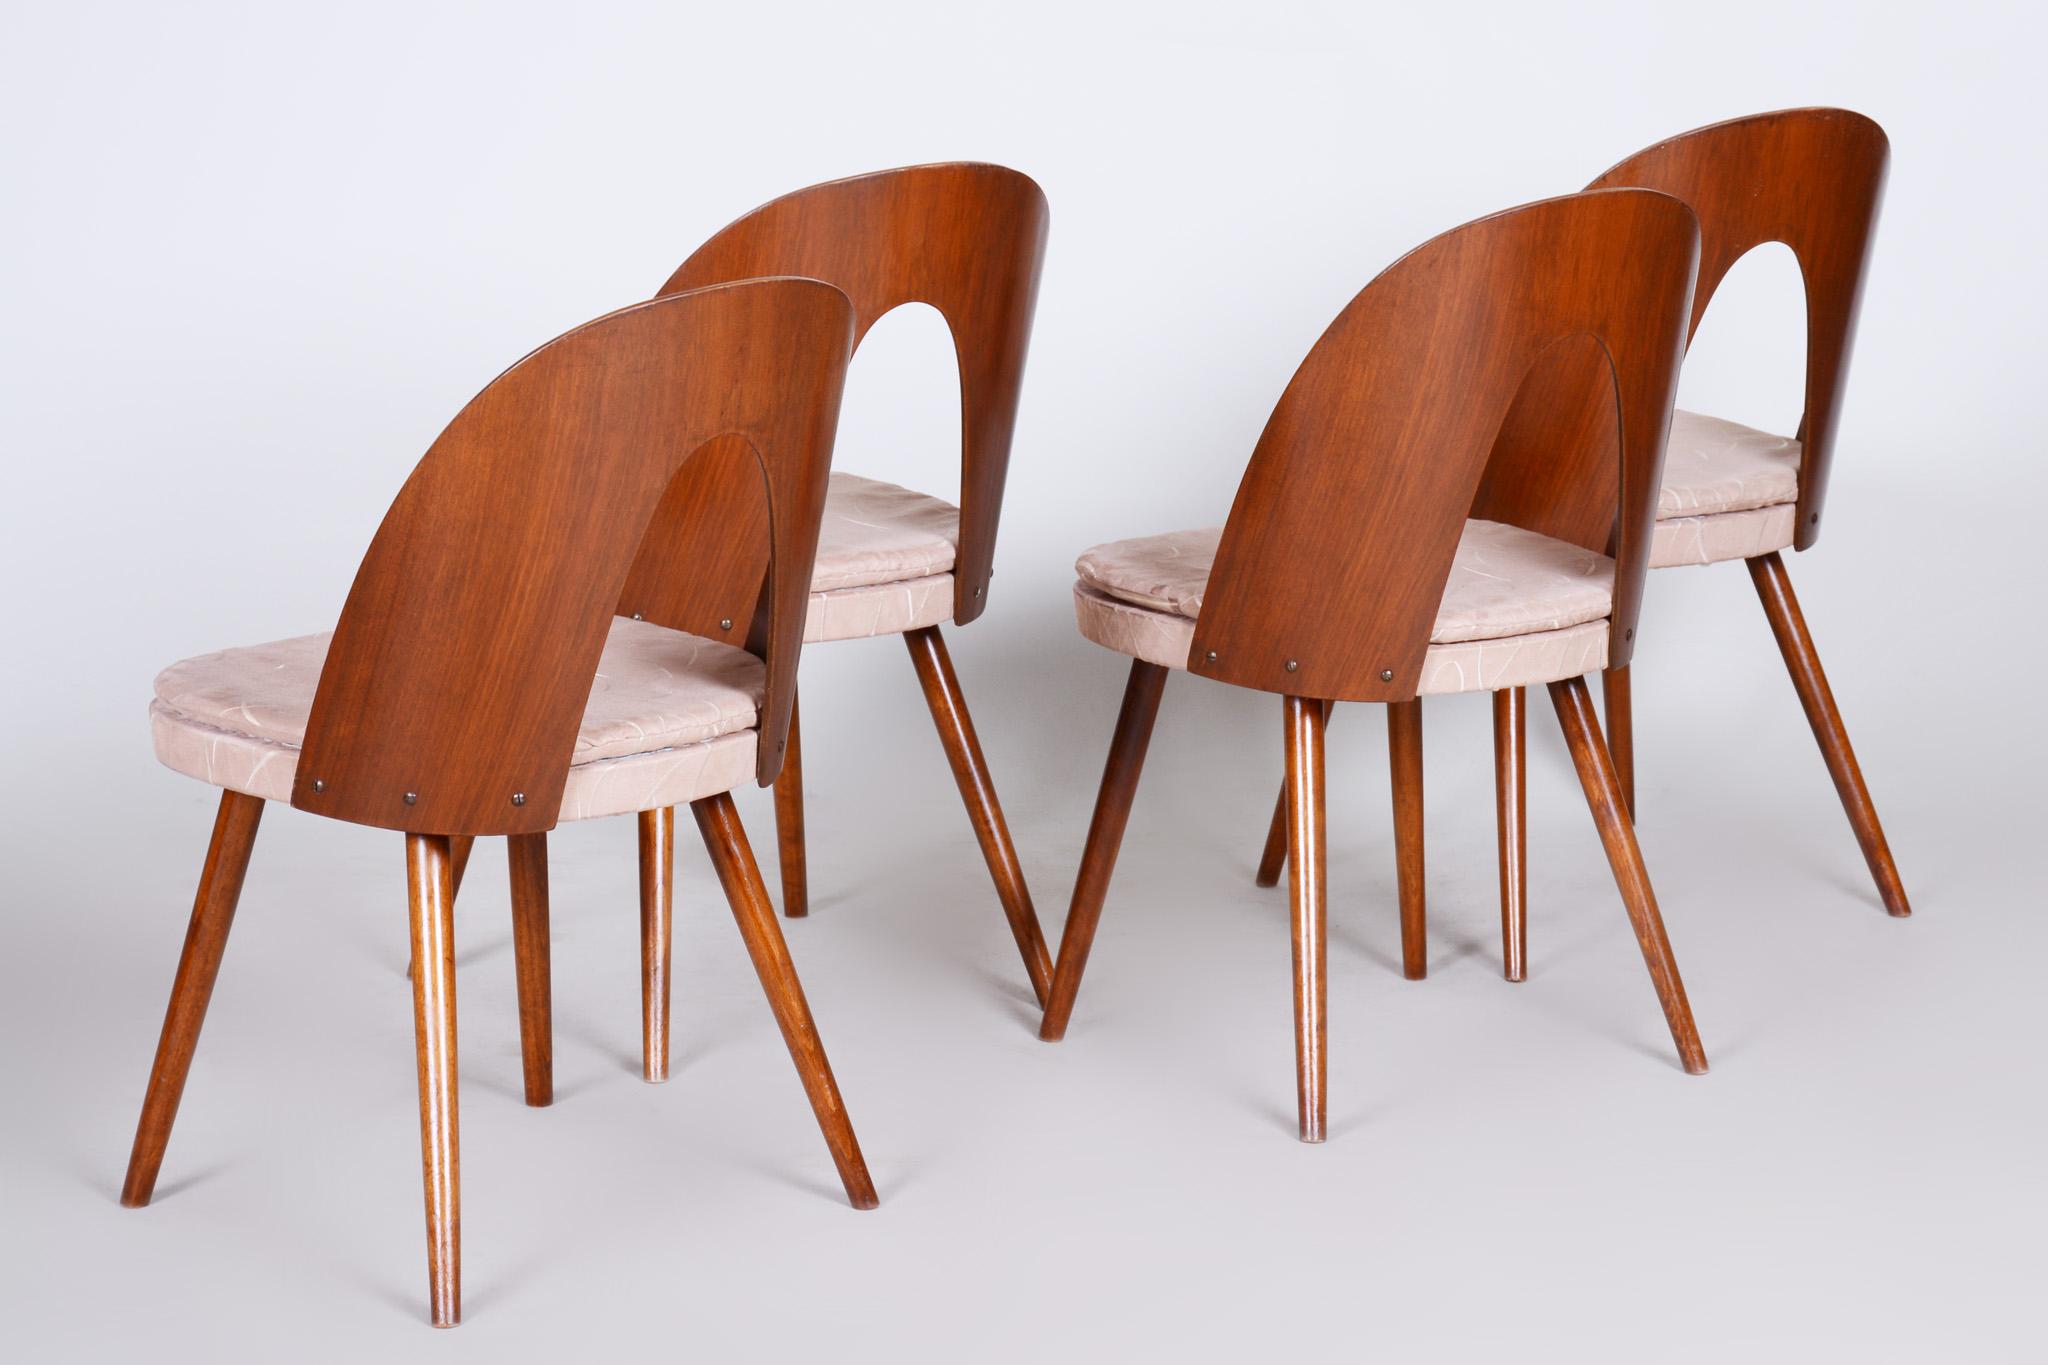 Fabric Well Preserved Czech Brown and Beige Chairs by Antonín Šuman, 4 Pcs, 1950s For Sale